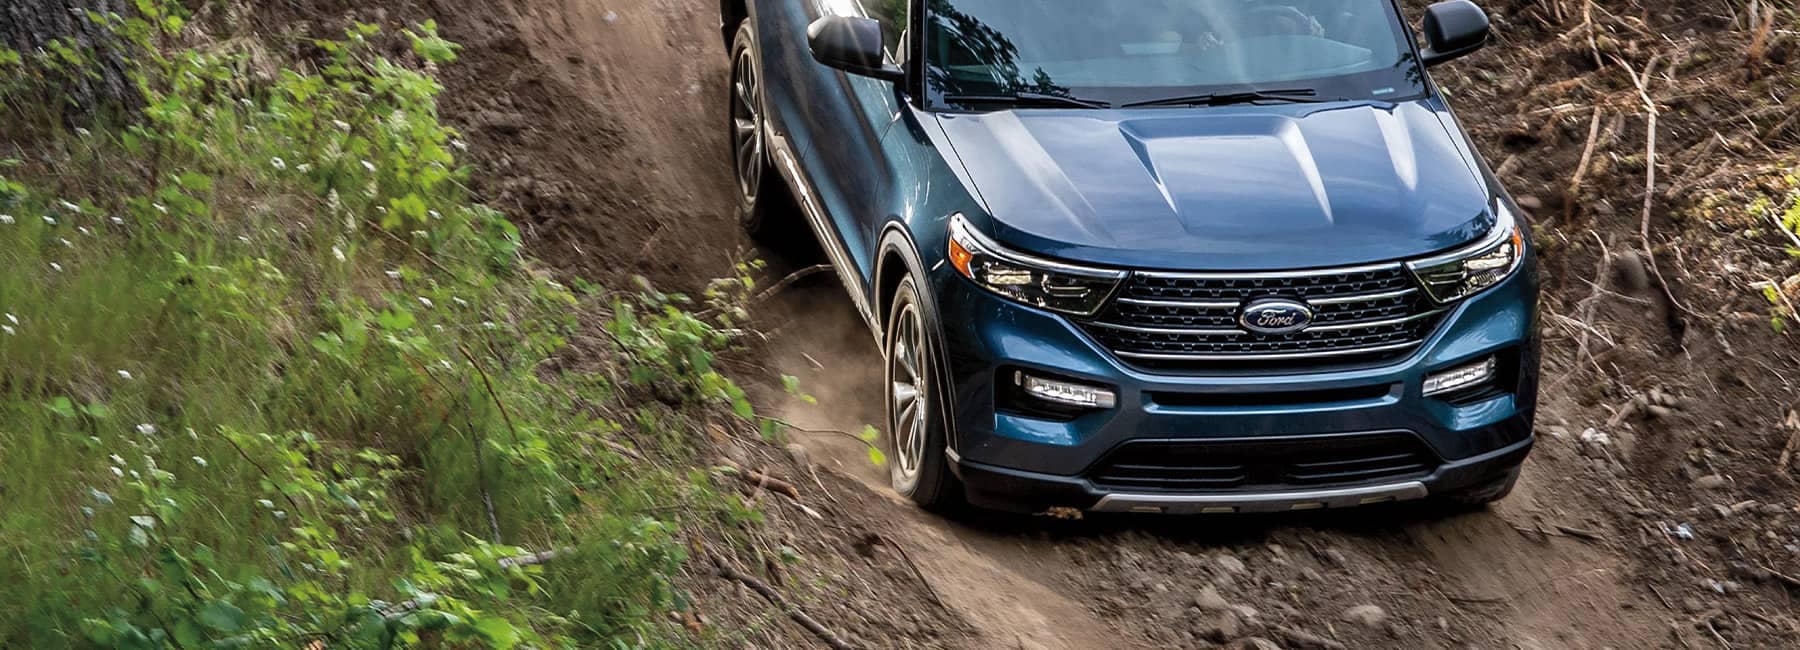 Atlas Blue 2022 Ford Explorer descending on a trail in the woods